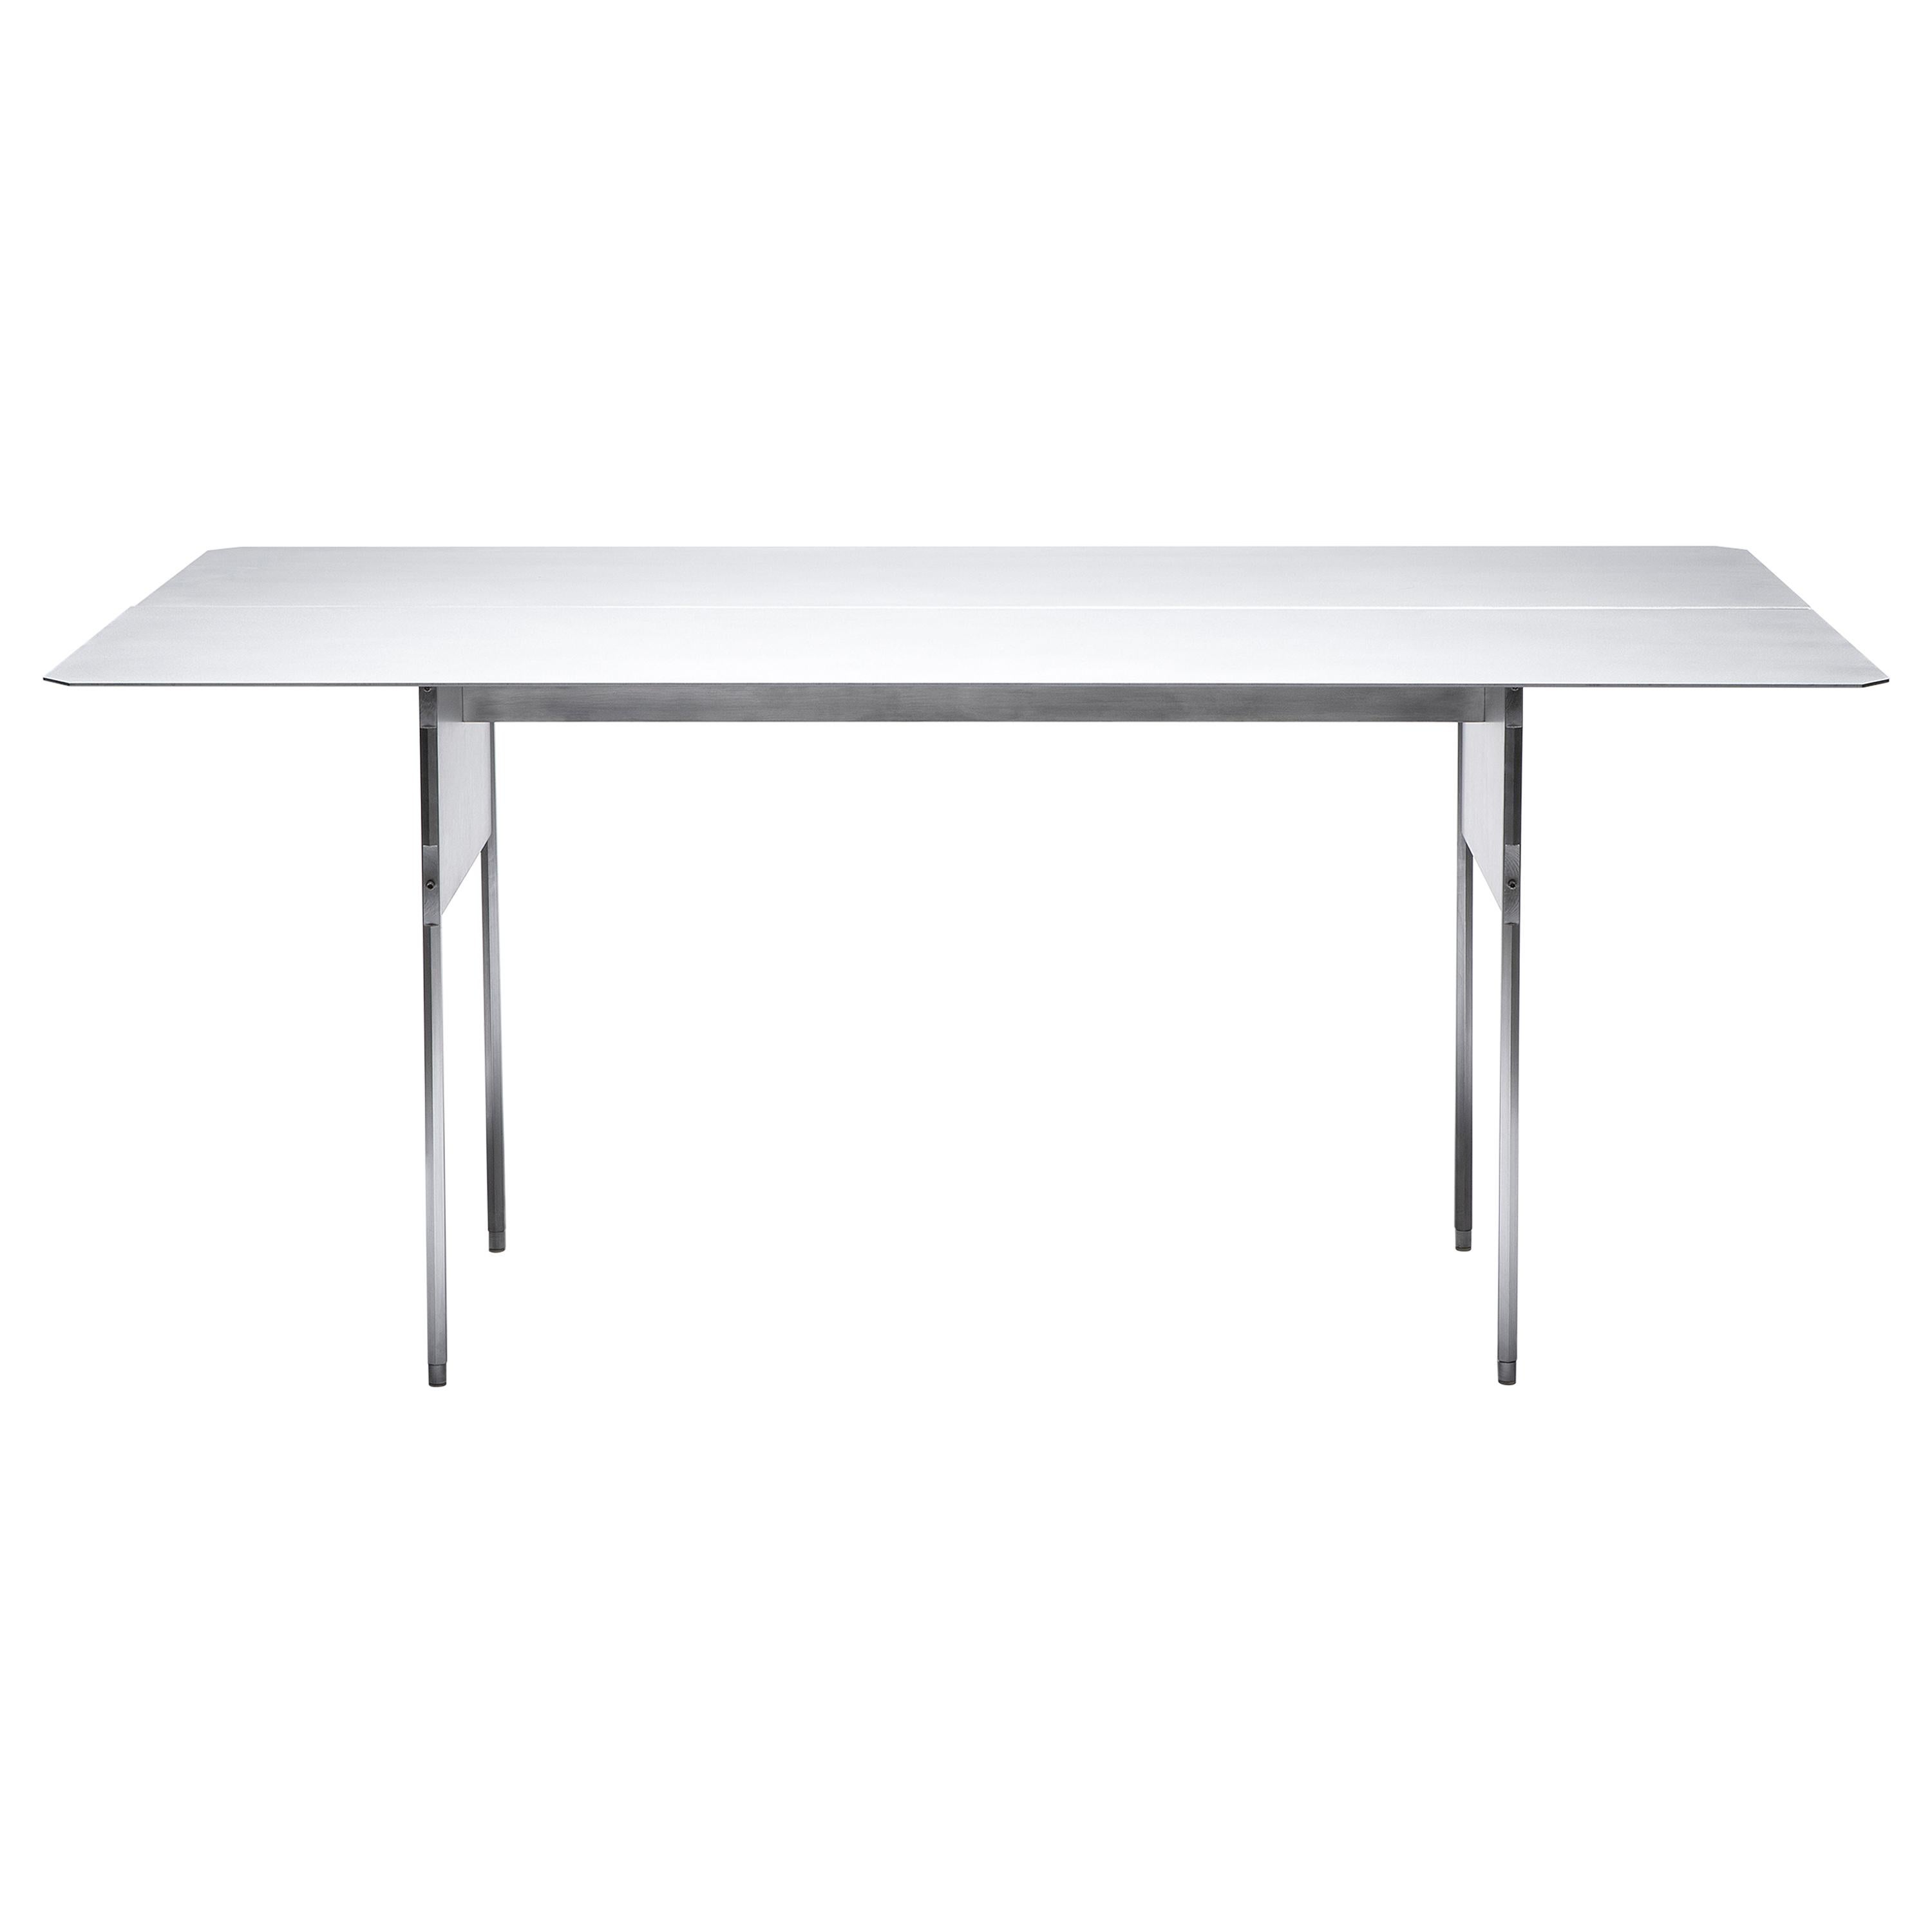 Carbonari Table by Scattered Disc Objects and Stefano Marongiu For Sale